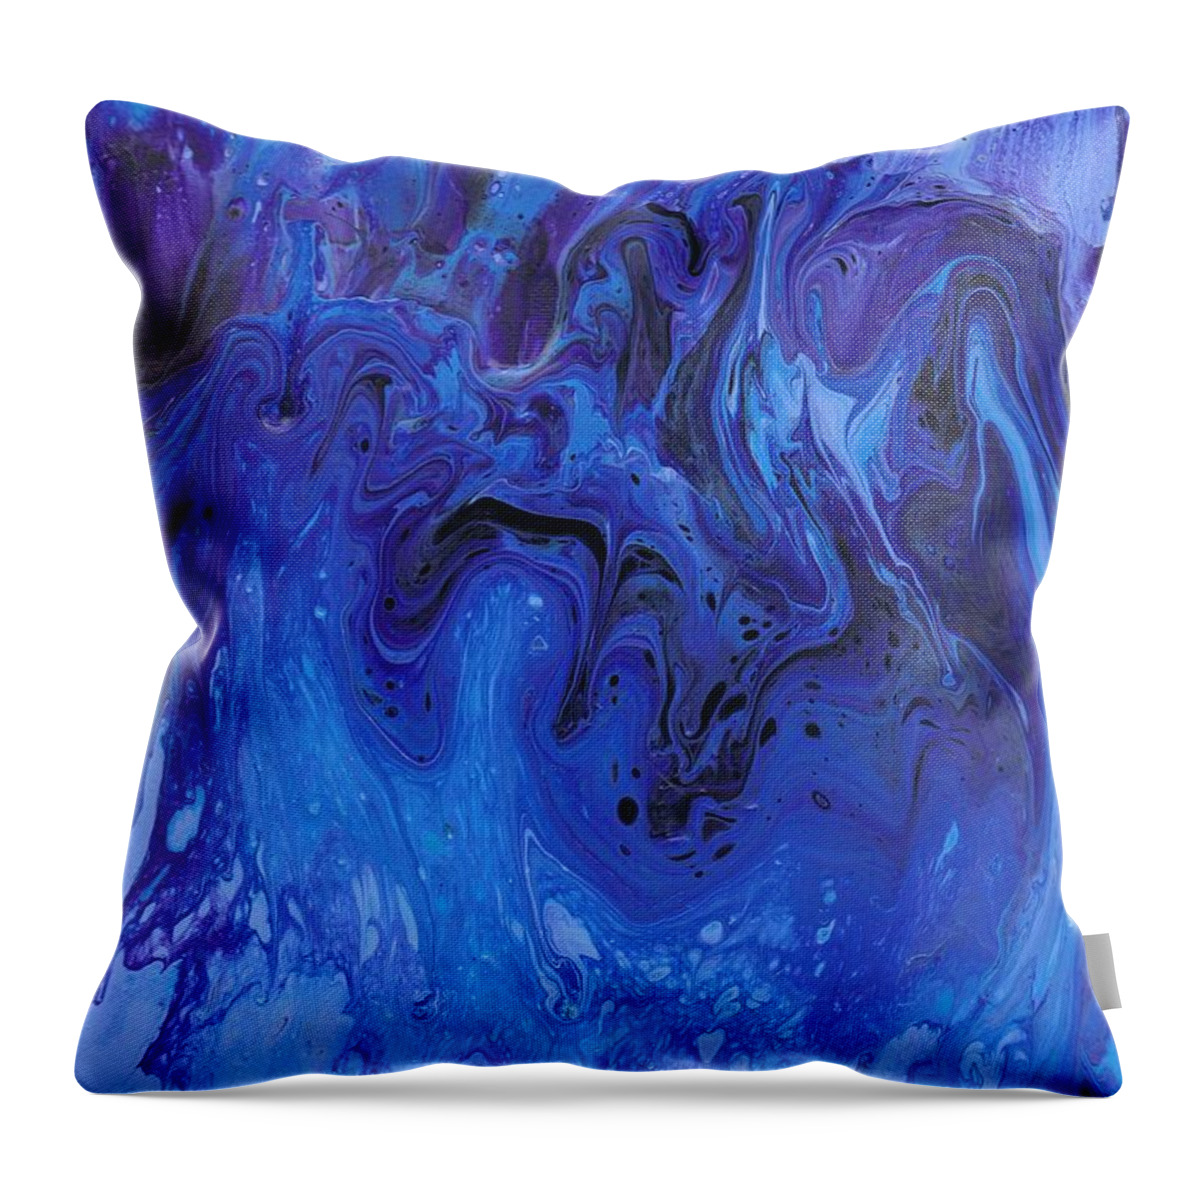 Living Water Throw Pillow featuring the painting Living Water Abstract by Karen Jane Jones